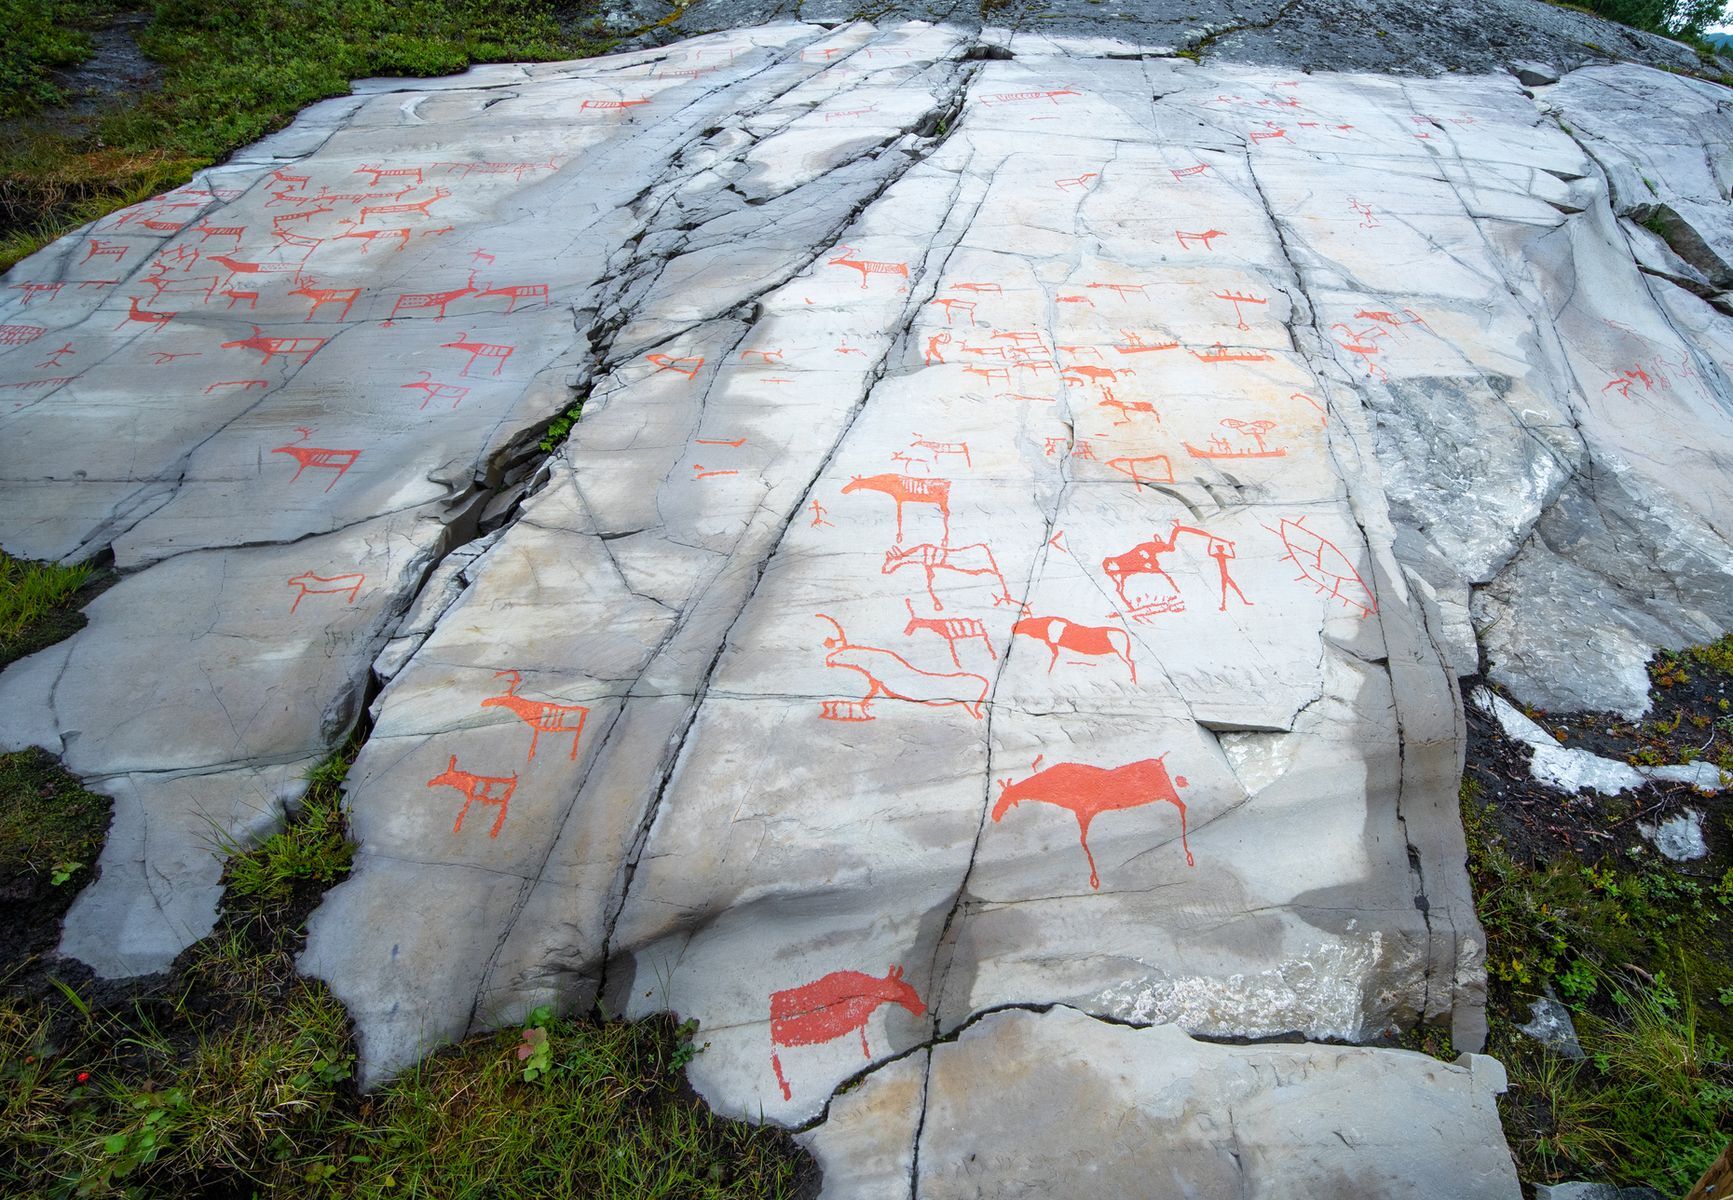 Located in the Finnmark region, the <a href="https://www.visitnorway.com/listings/alta-museum-world-heritage-rock-art-centre/126179/?lang=usa" rel="noreferrer noopener">Alta Rock Art Museum</a> is a must-see for history buffs. Exhibits include an incredible collection of prehistoric art illustrating the life and customs of ancient peoples. World-renowned for their cultural significance, some of these rock-engraved artefacts are thought to date back over 6,000 years.